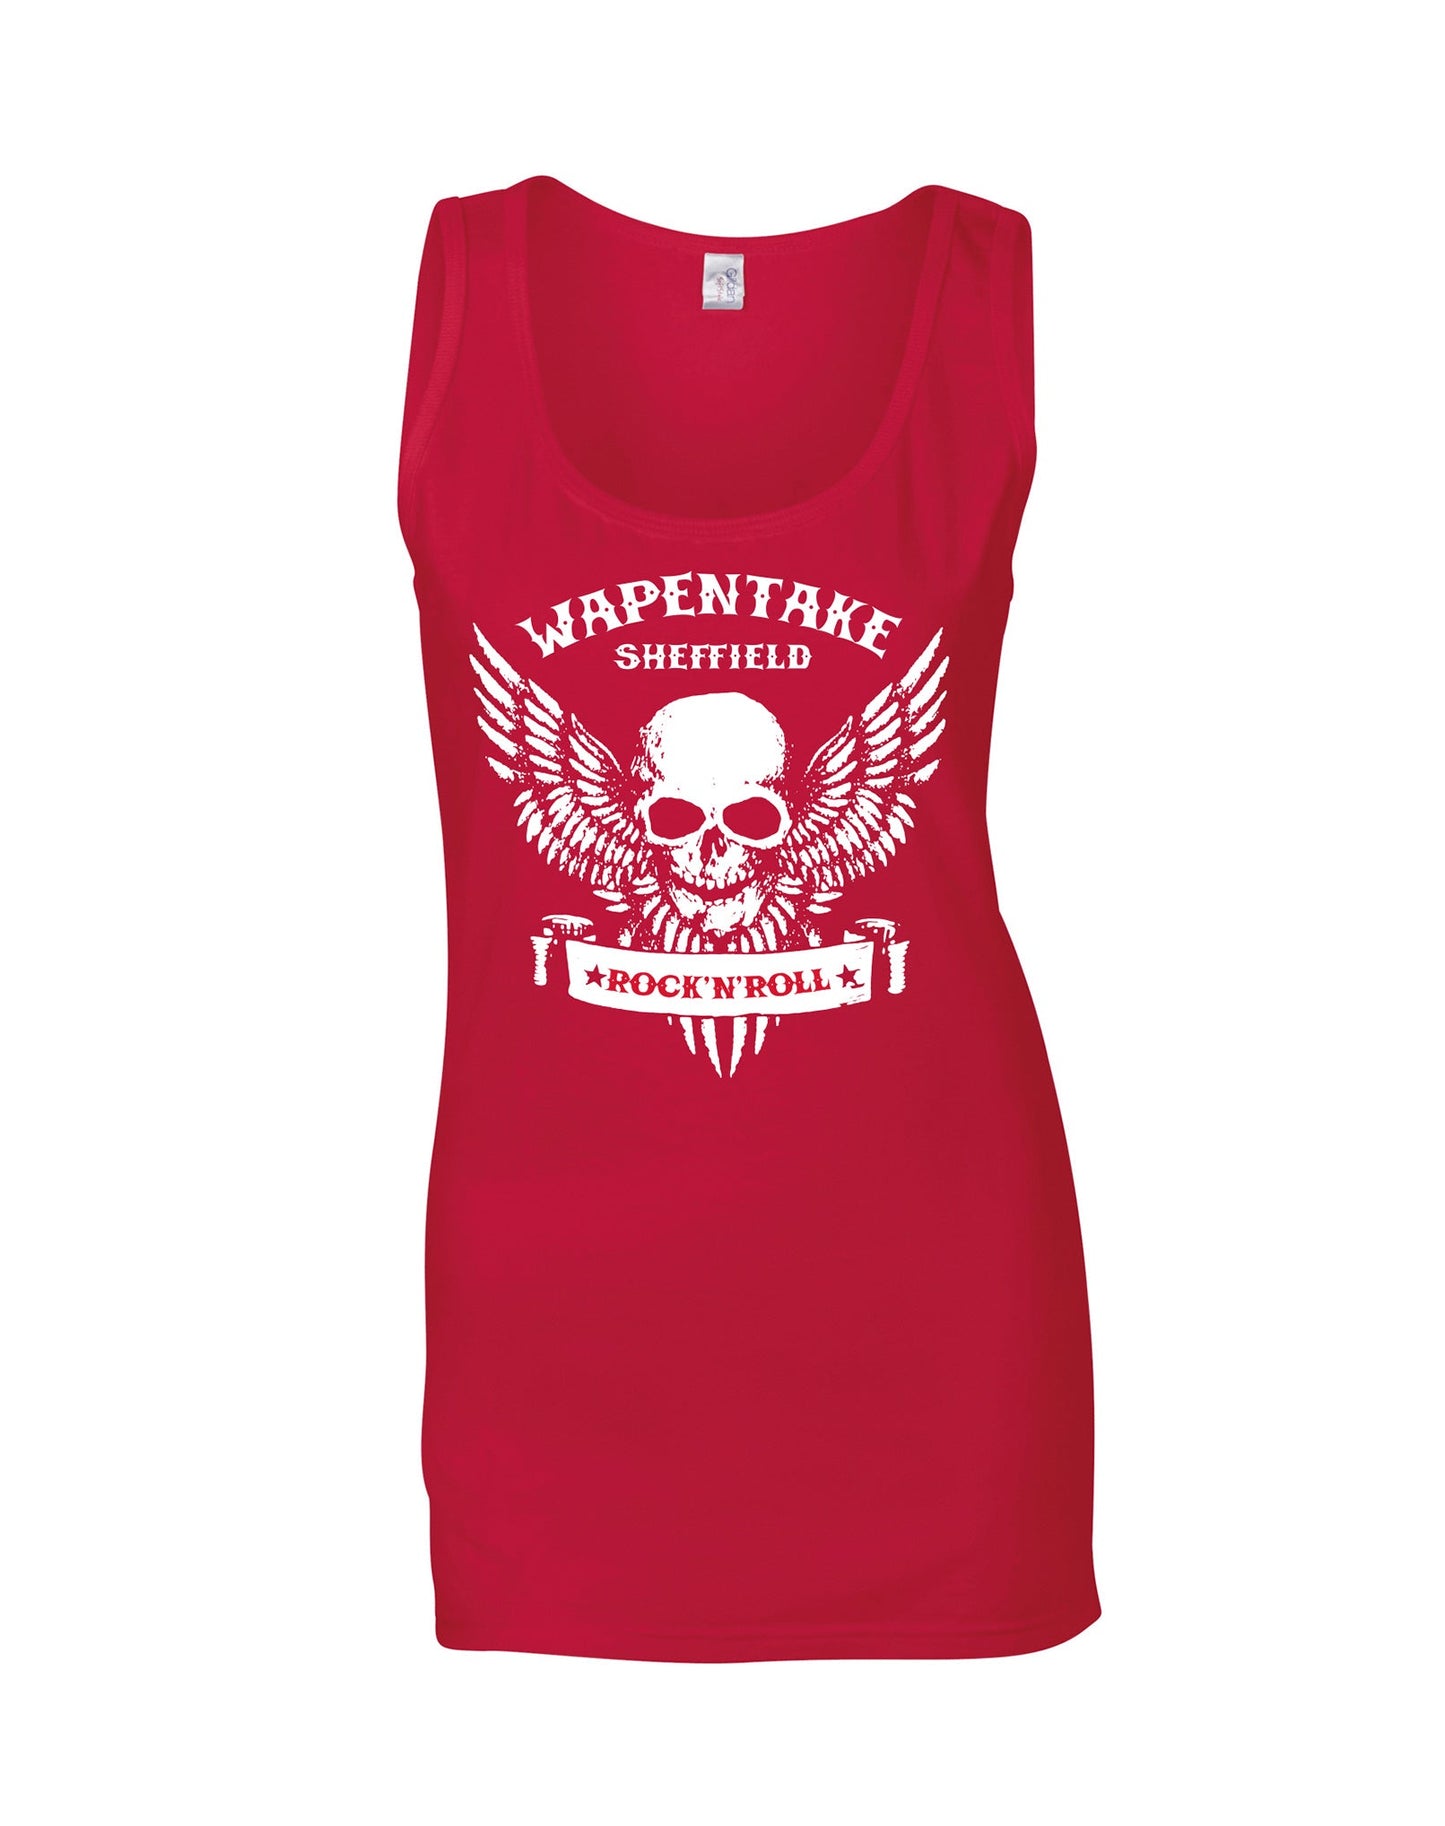 Wapentake skull/wings ladies fit vest - various colours - Dirty Stop Outs